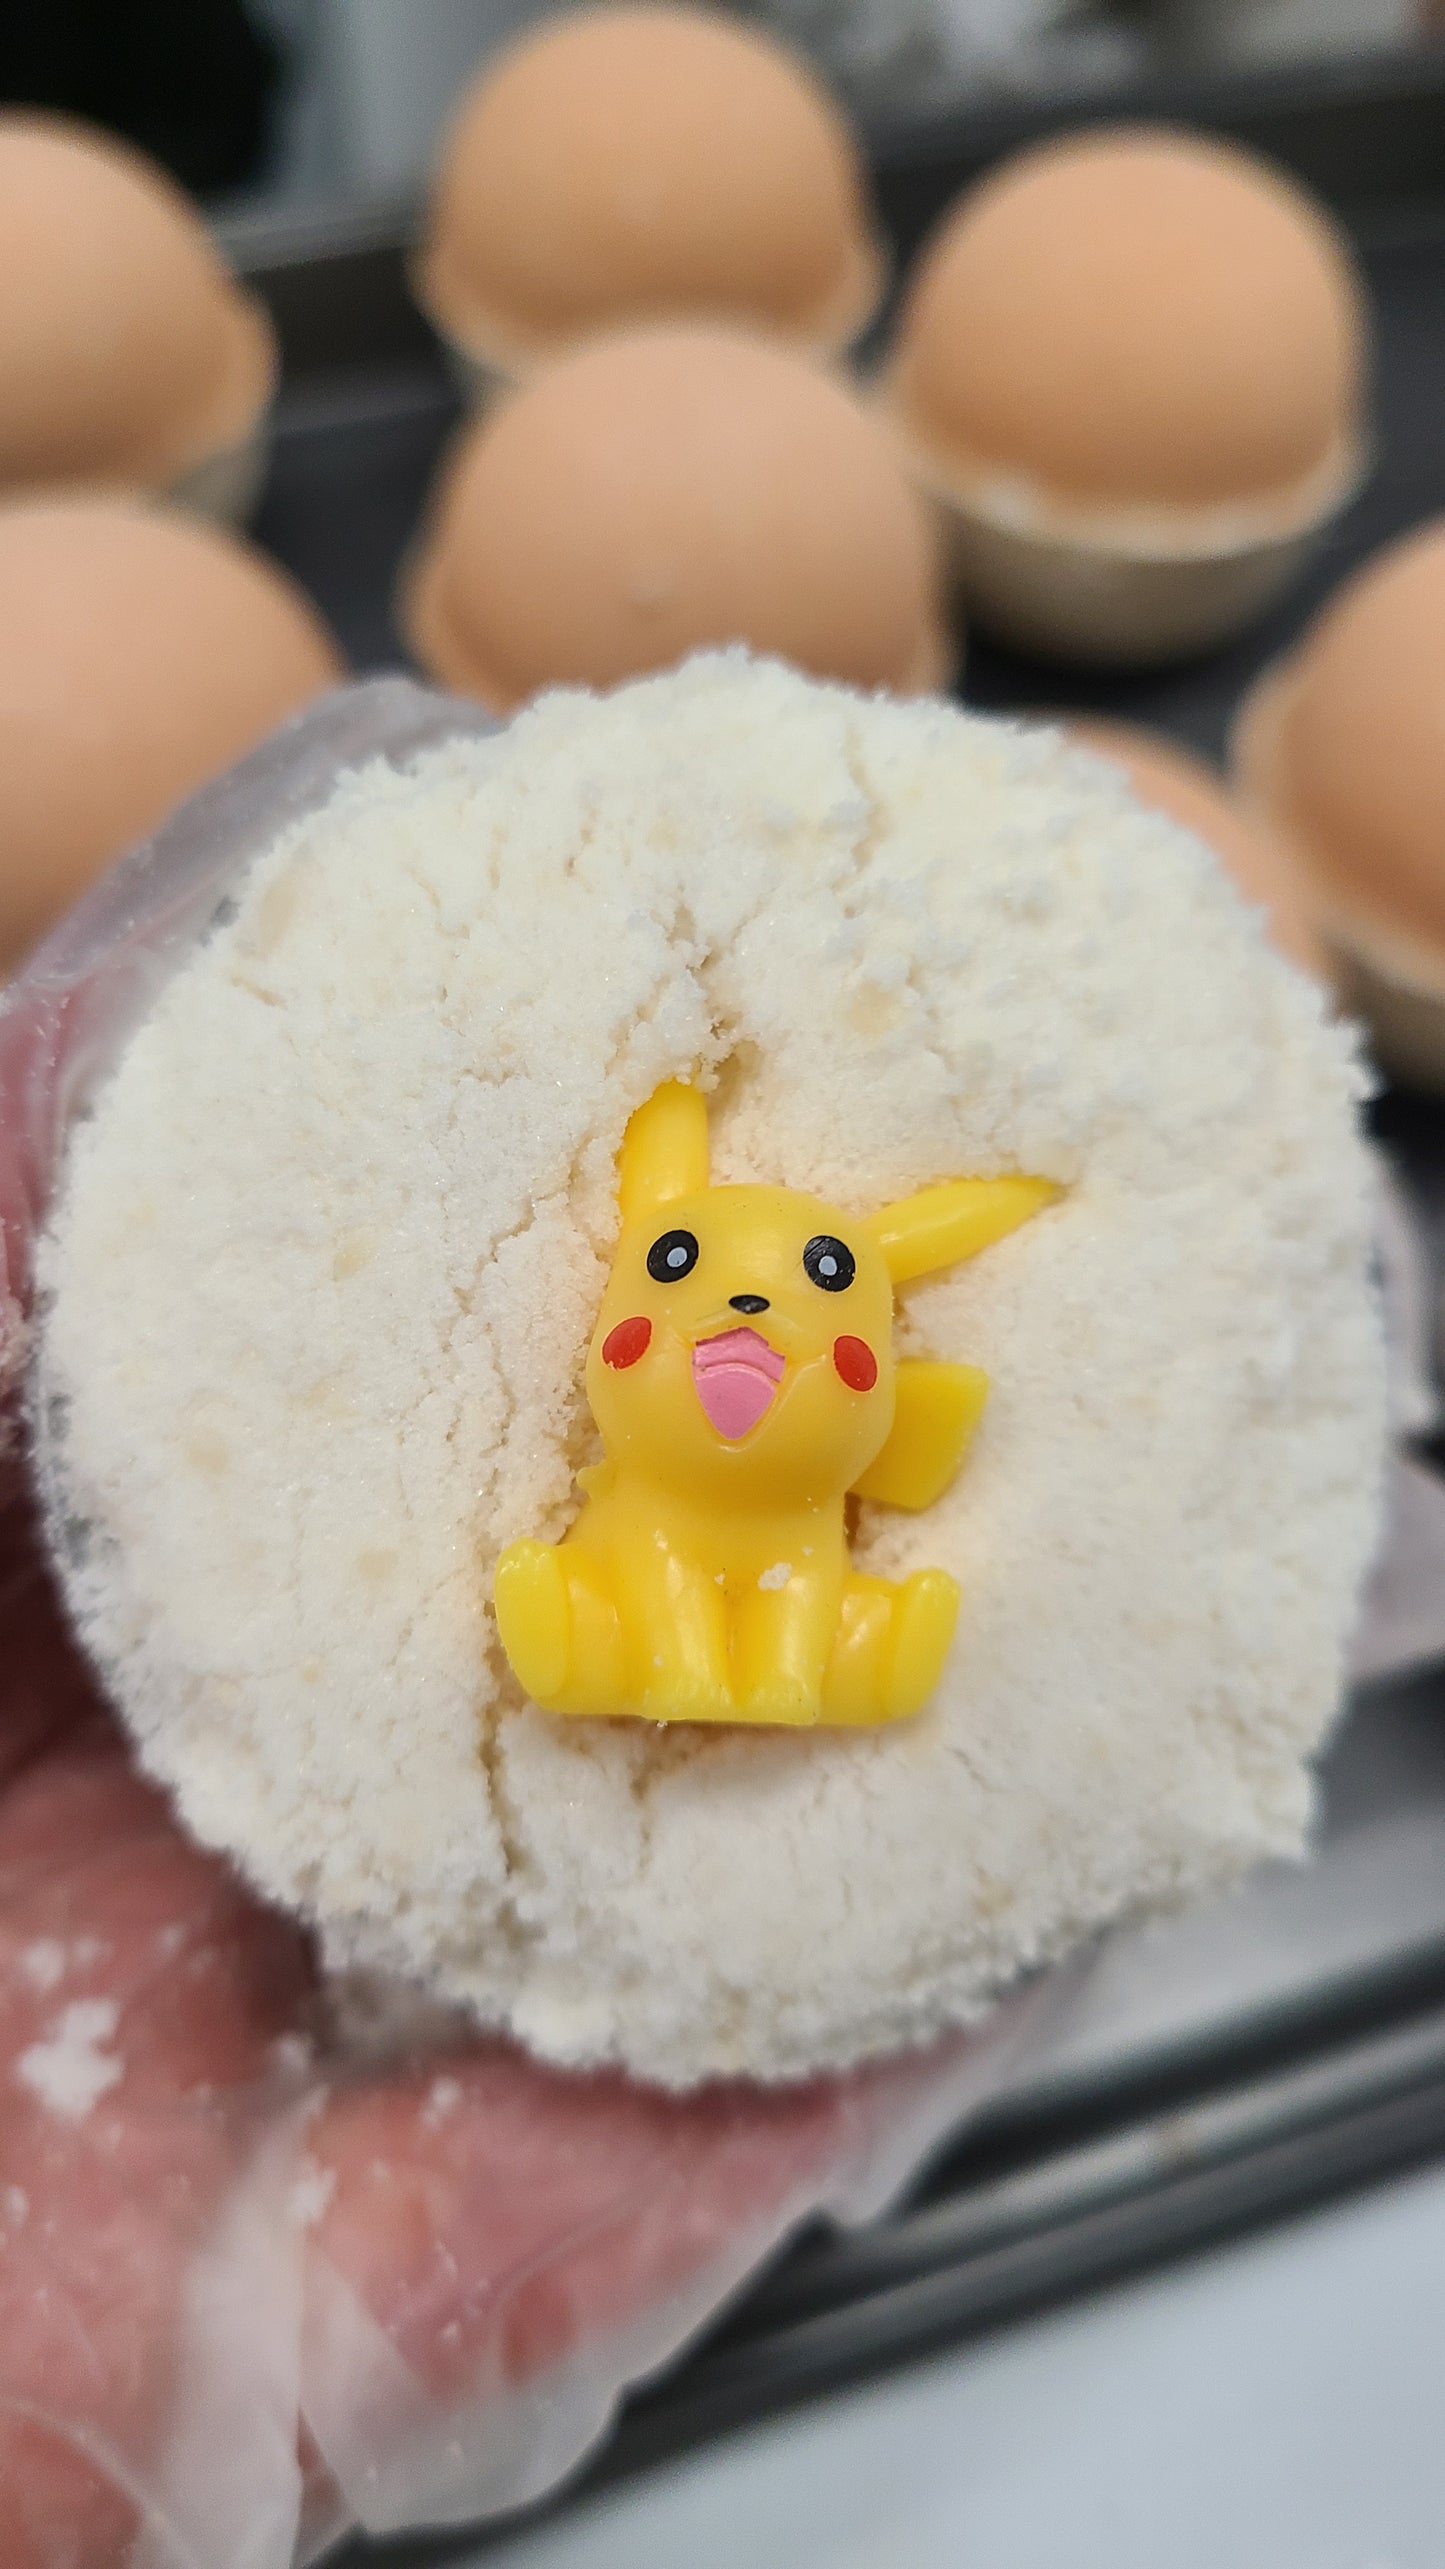 Bath bomb making for children  (Booking for June 2nd)